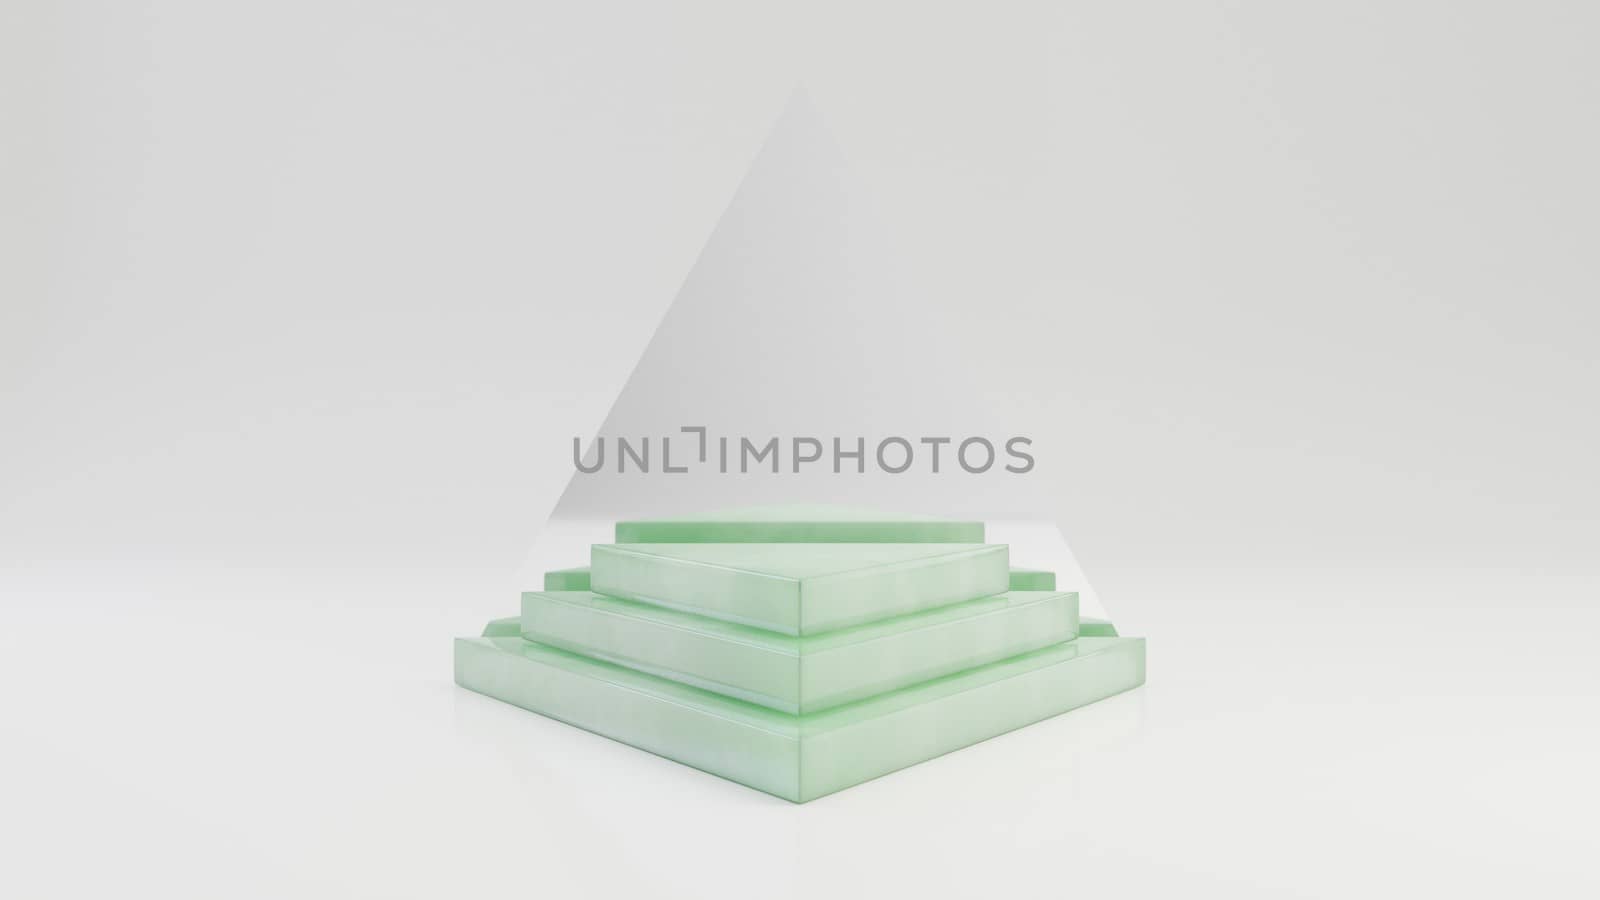 Triangle jade pedestal steps with mirror isolated on white background. 3d rendered minimalistic abstract background concept for product placement.